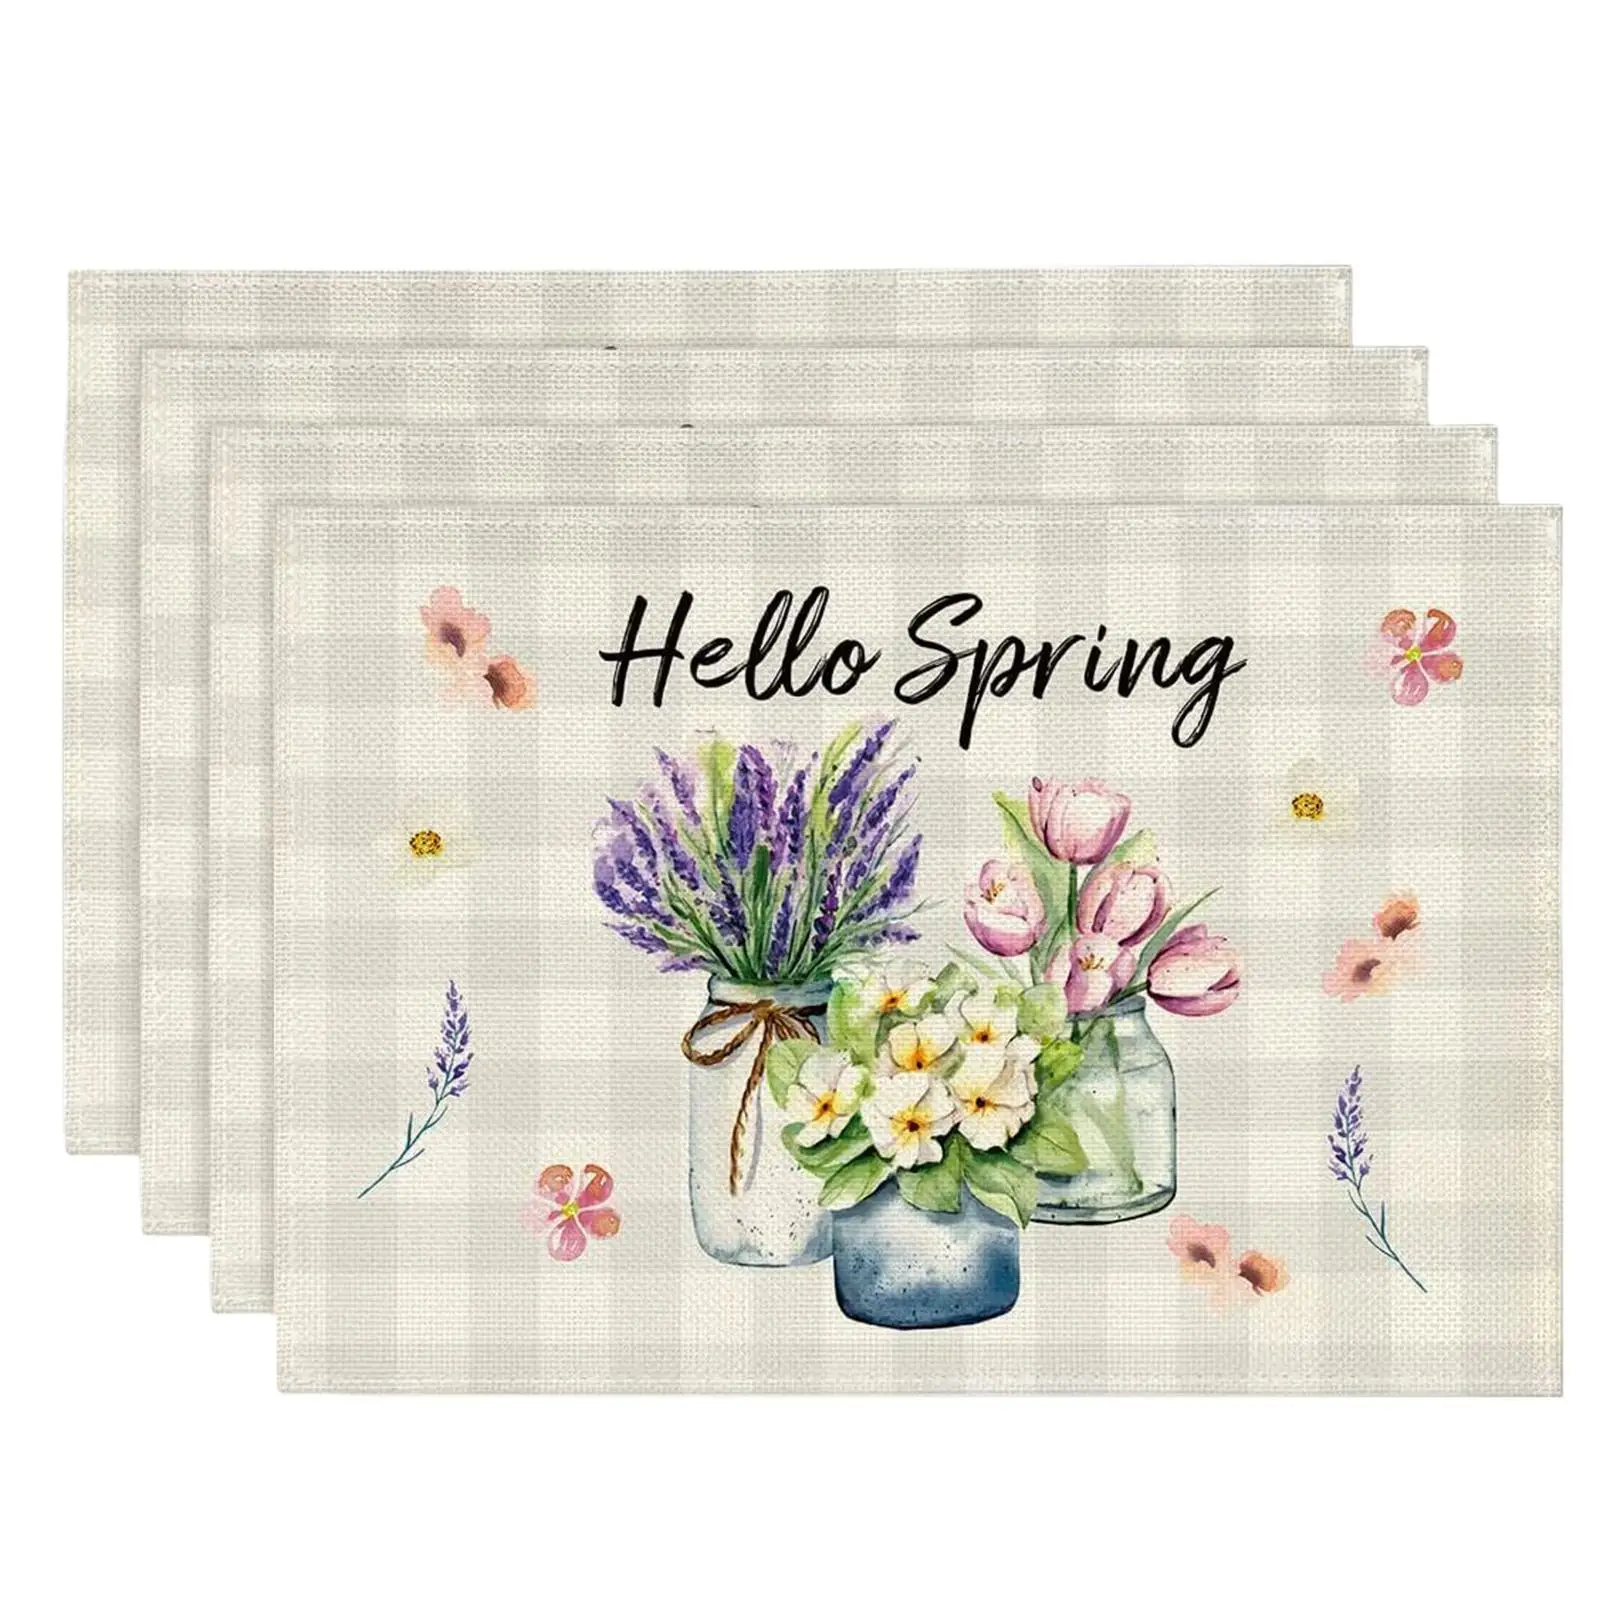 Spring Table Runner Floral Pattern Decorative Tabletop Collection Easter Decorations for Anniversary Holiday Celebration Party